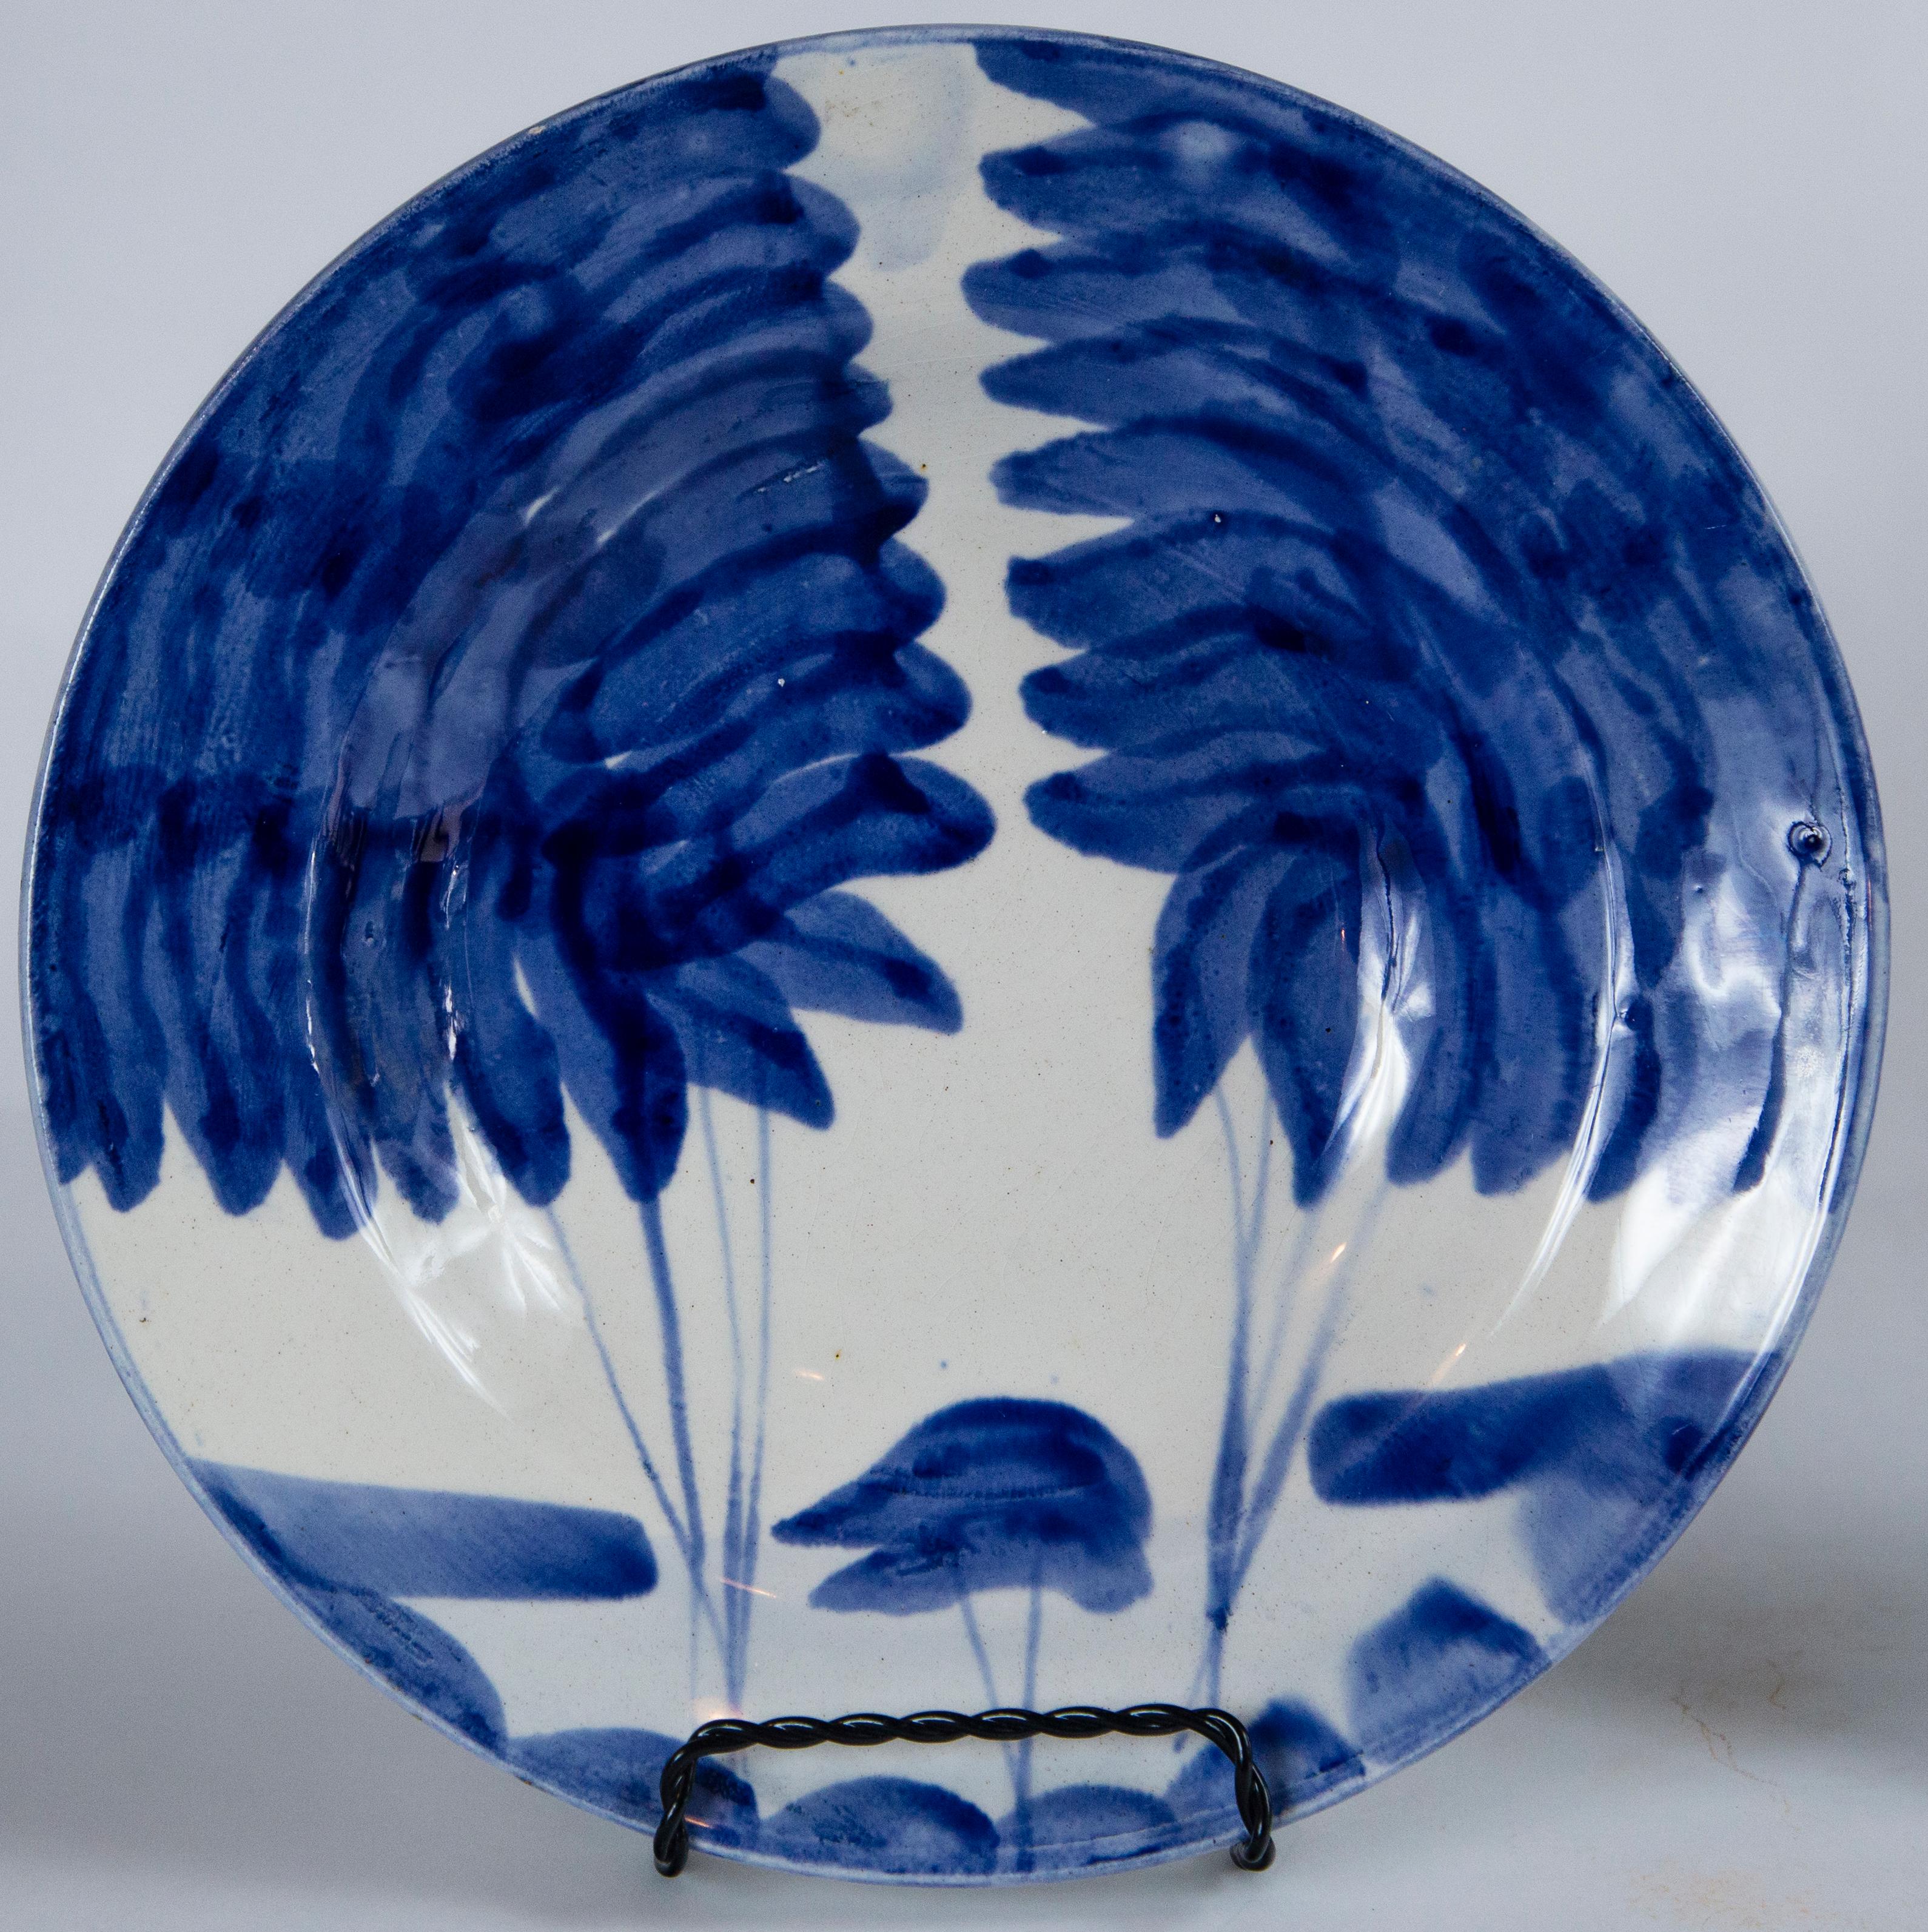 Hand-Painted Pair of Hand Painted Blue and White Ceramic Bowls, Europe, Mid-20th Century